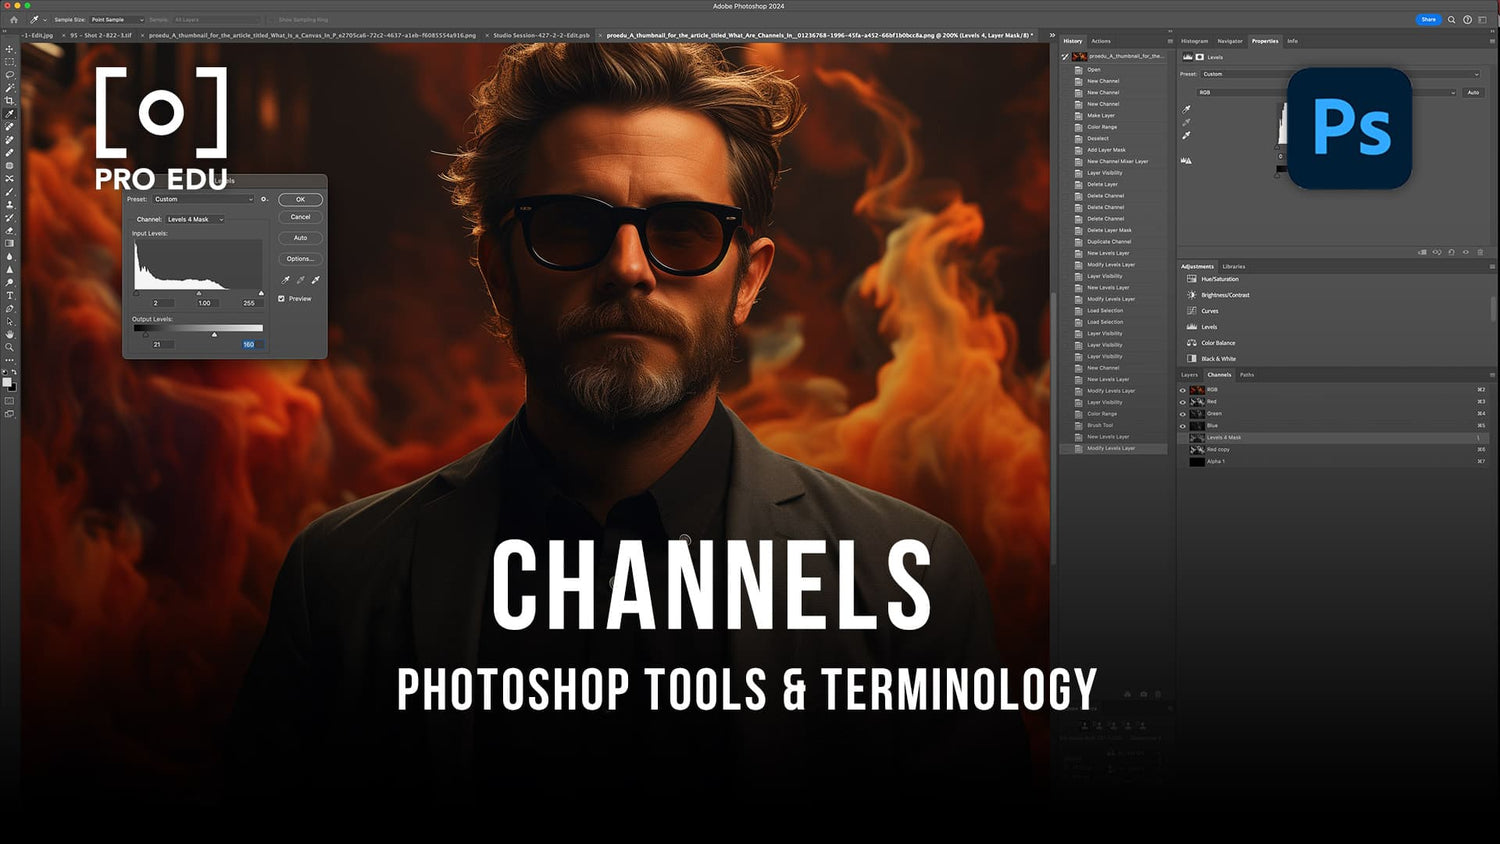 Channels in Photoshop - PRO EDU Color Theory Guide